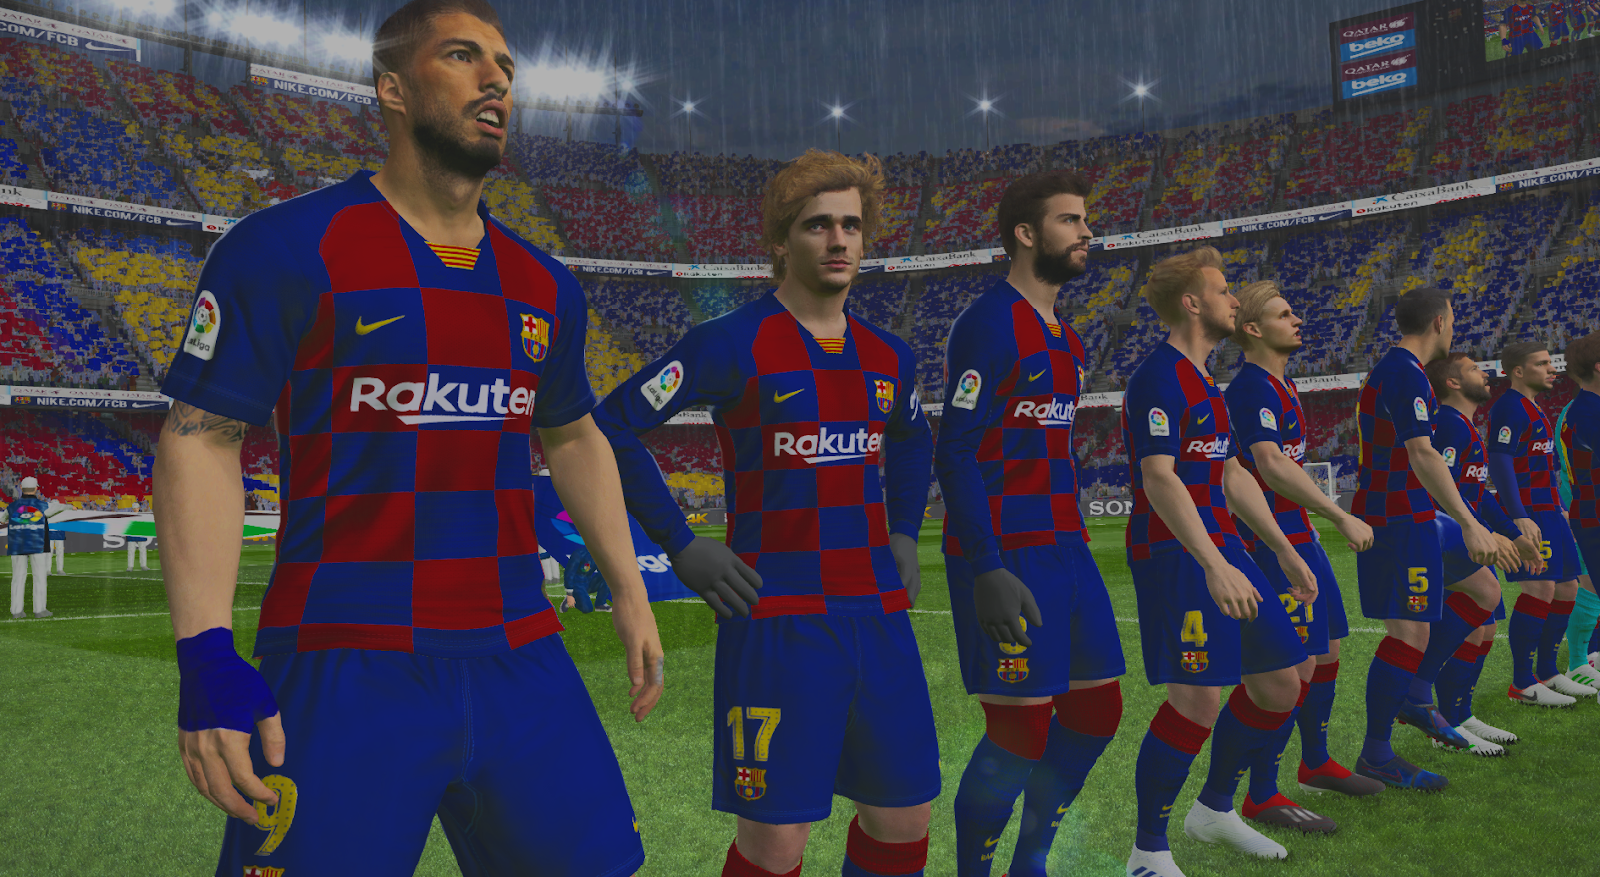 PES 2017 PTE PATCH 2017 5.0 AIO + Update 5.3 Season 2016/2017